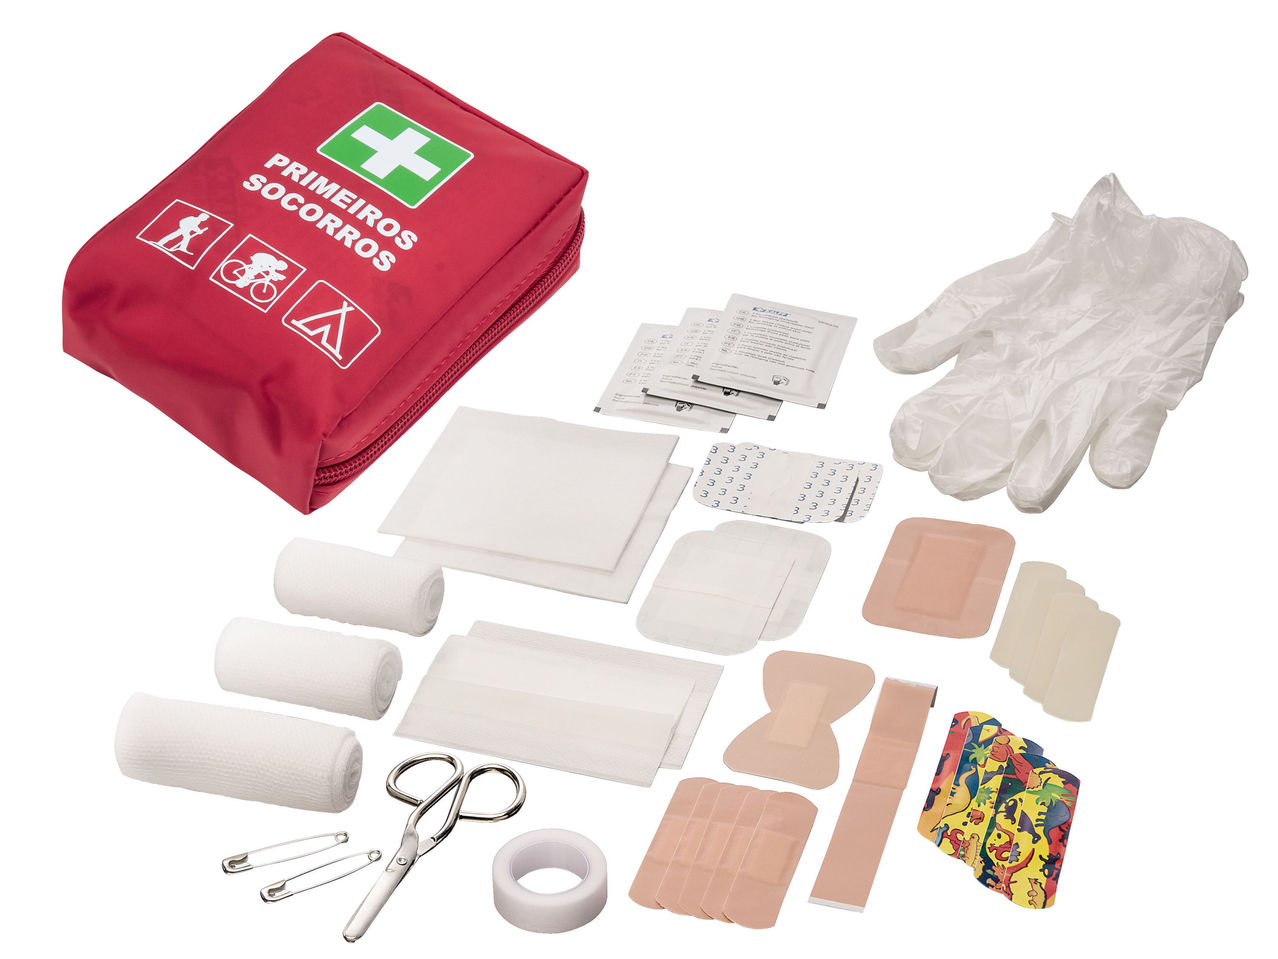 First Aid Kit for Minor Wounds